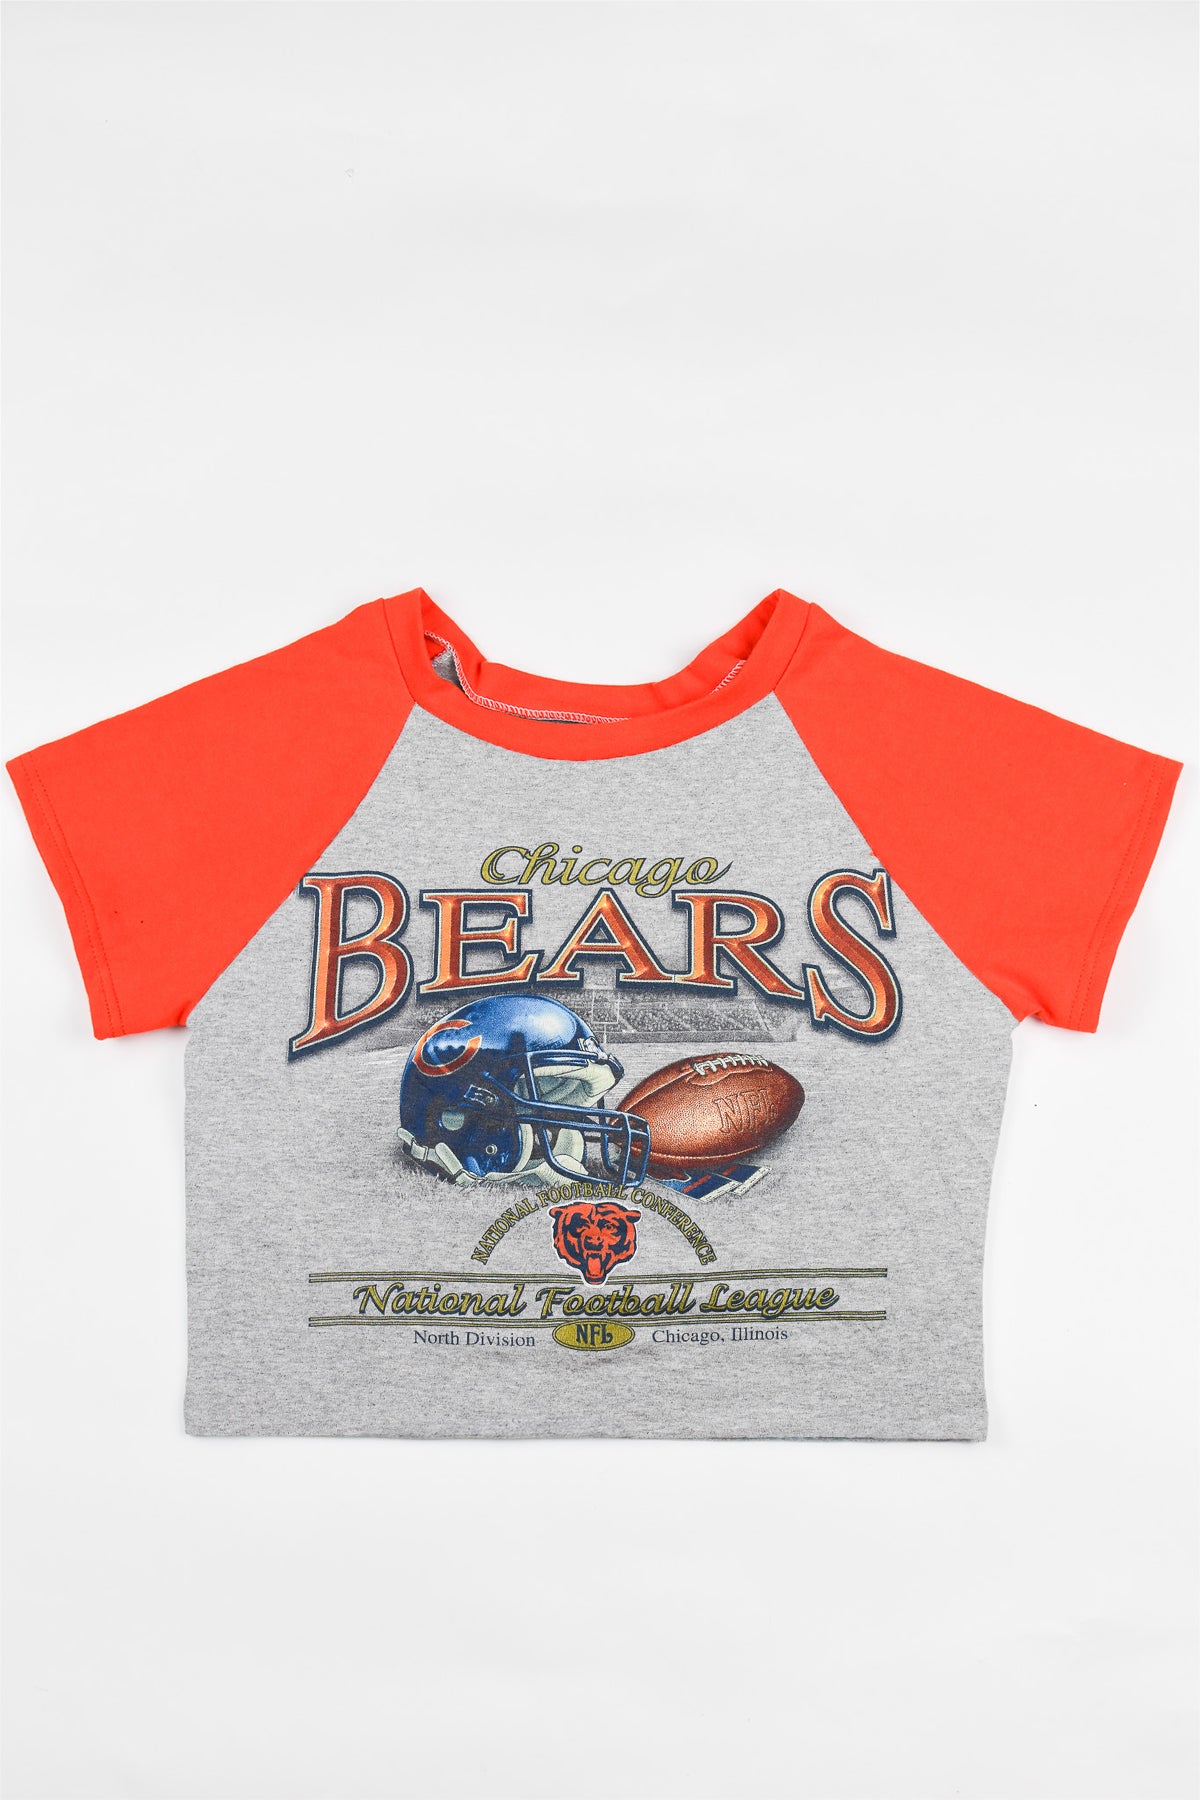 Upcycled Bears Baby Tee *MADE TO ORDER*